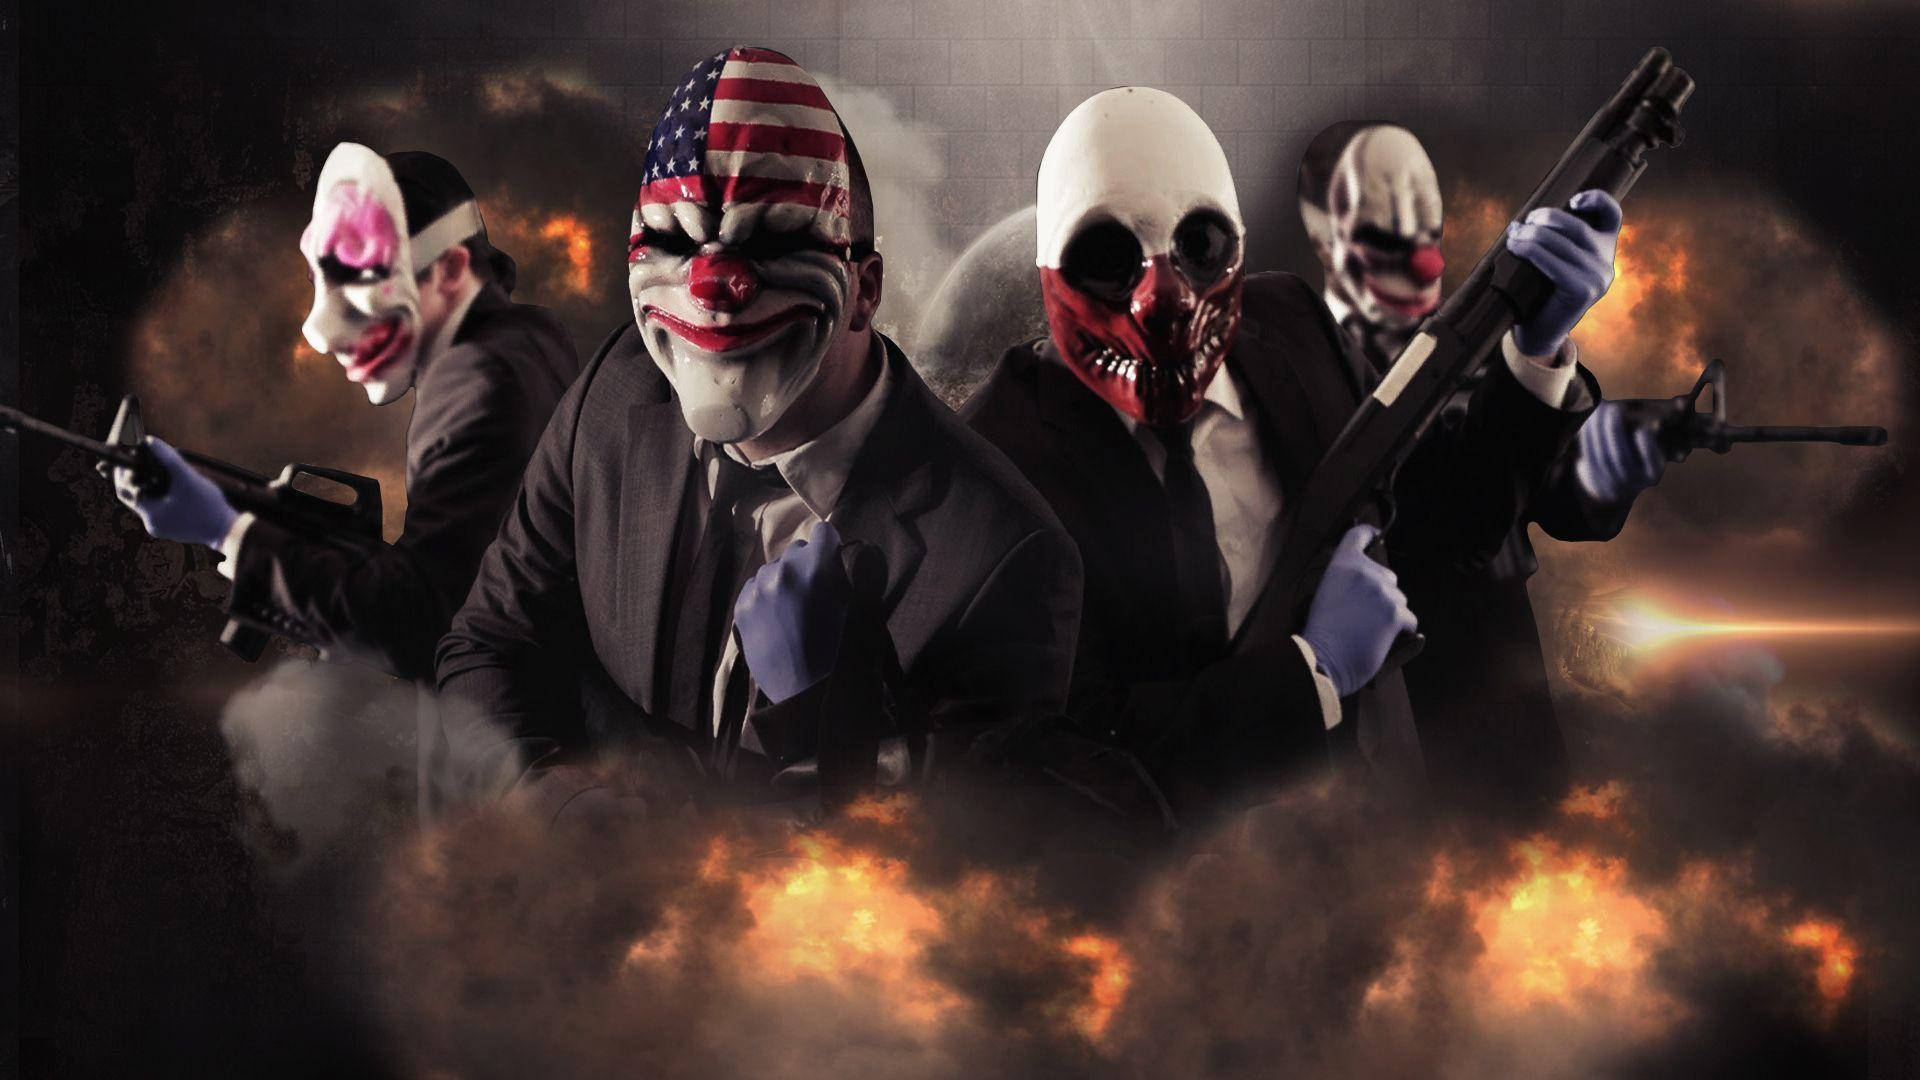 Video Game Payday 2 Gang Explosion Effect Wallpaper